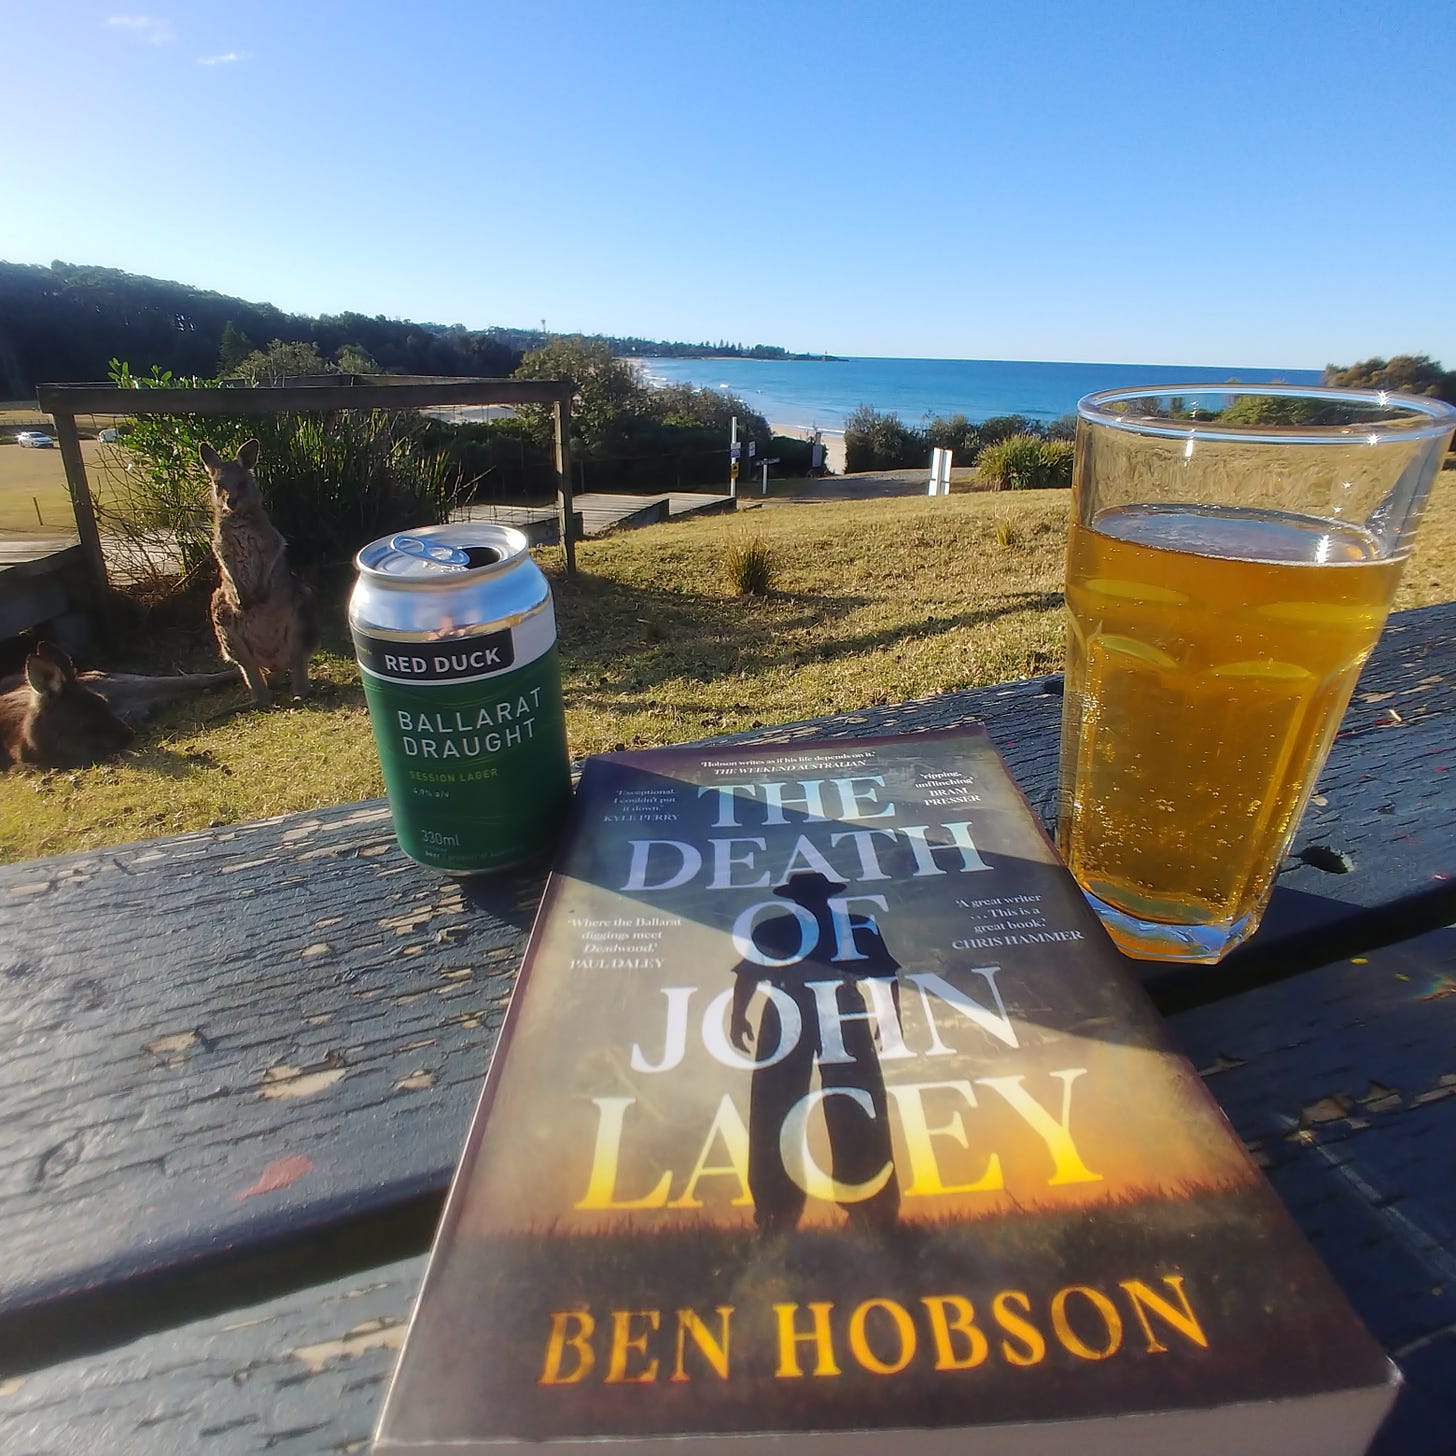 The novel 'The Death of John Lacey' by Ben Hobson, a Ballarat Draught beer from Red Duck Brewery, and a kangaroo by the beach